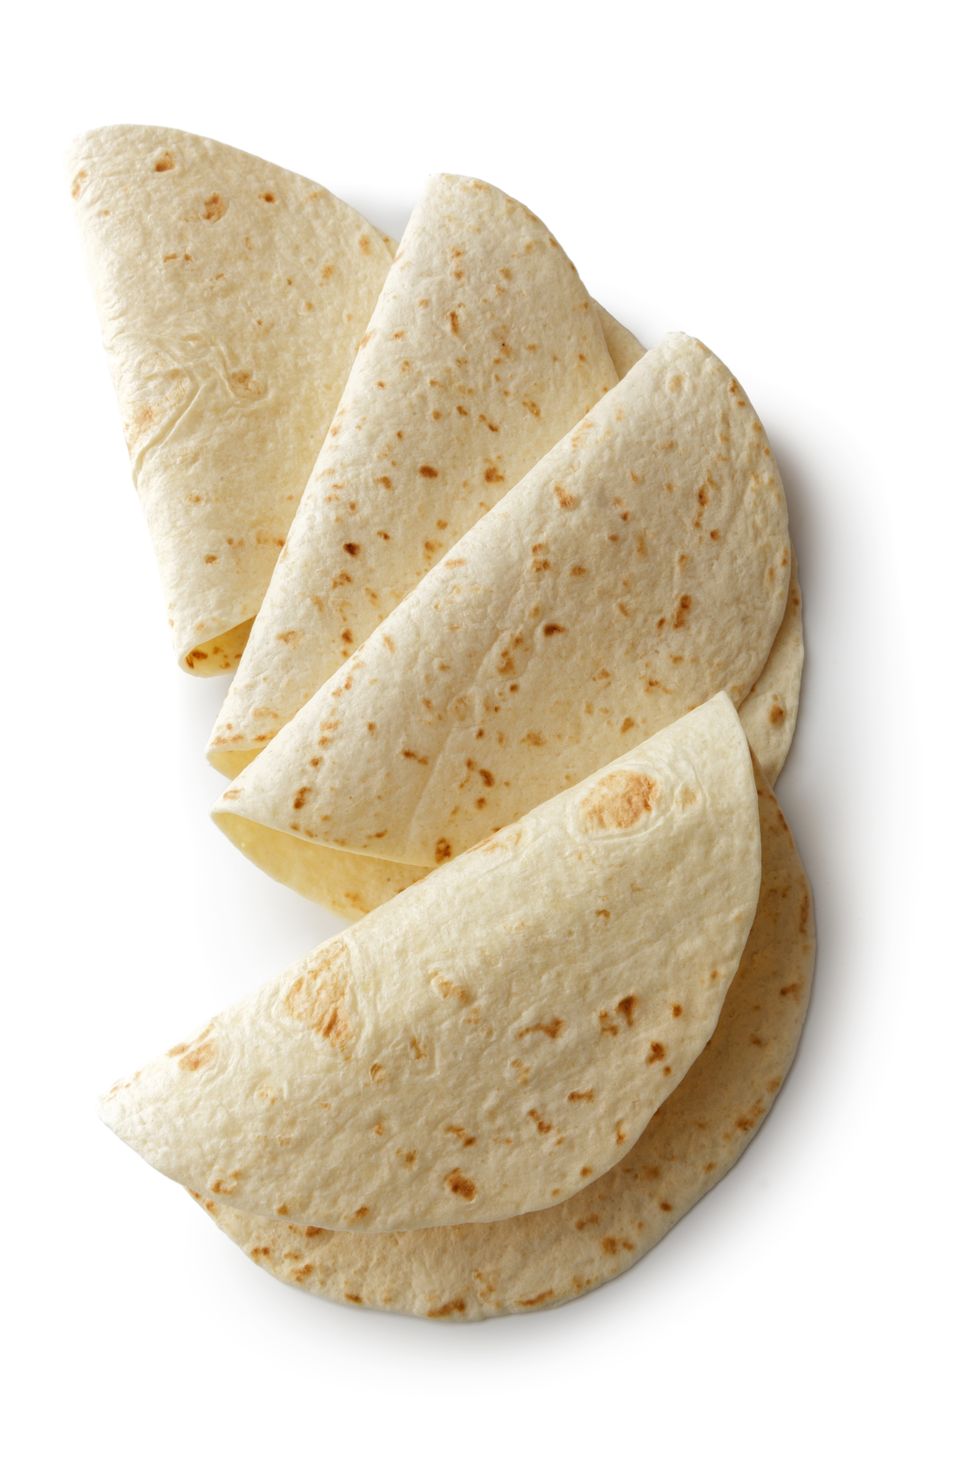 TexMex Food: Tortillas Isolated on White Background